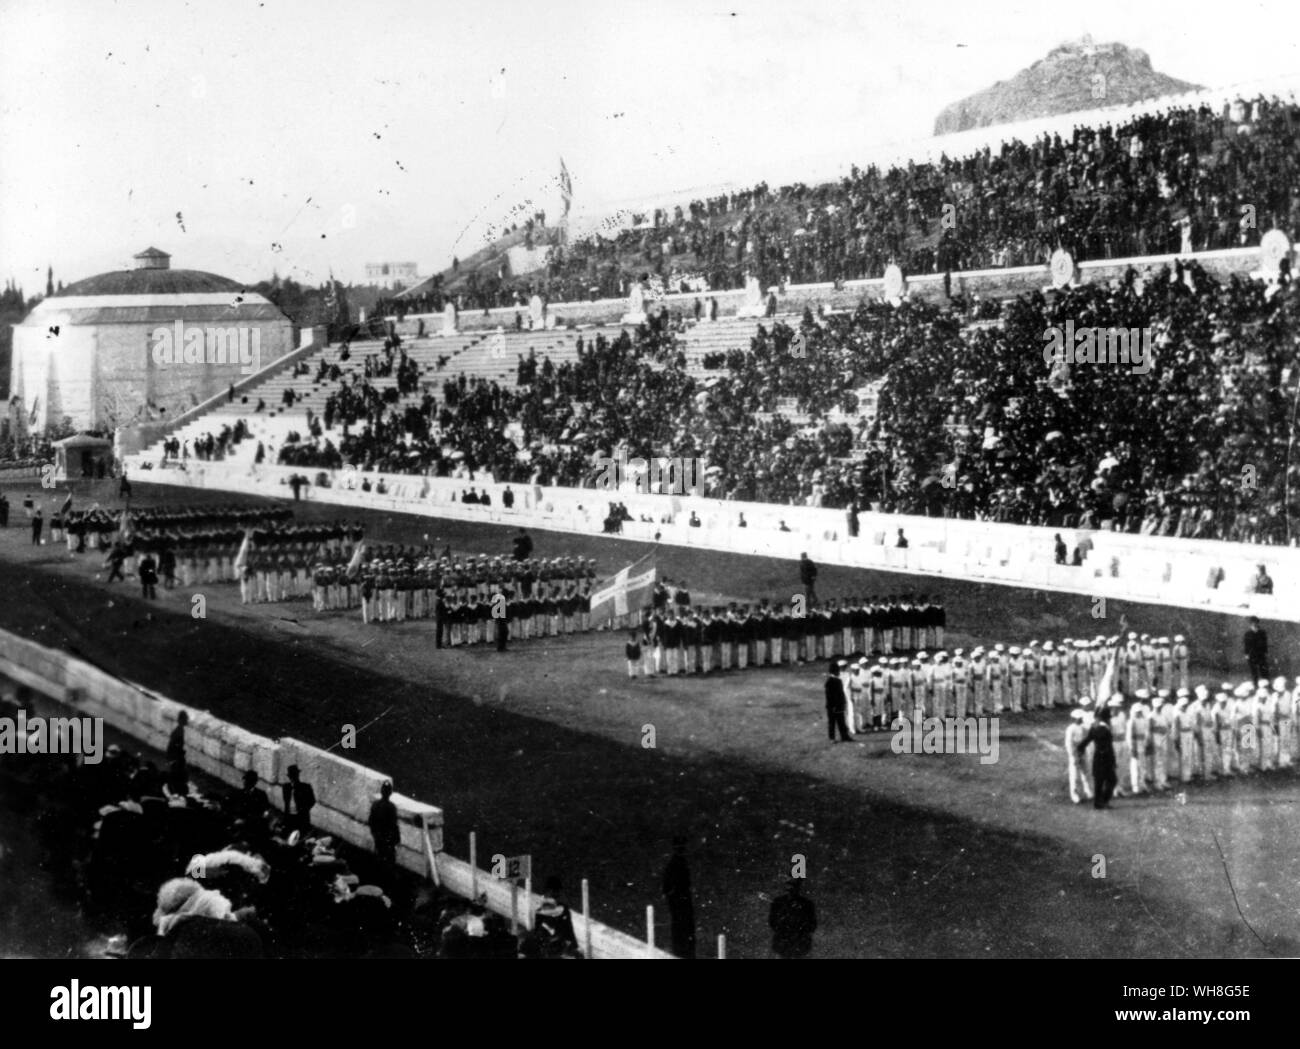 Opening Ceremony of the 1896 Olympic Games at the Panathenaic Stadium in Athens , Greece.. The date is 6 April 1896 by the new calendar but at the time the local date in Greece was 25 March 1896 as they were still using the Julian calendar.. Stock Photo